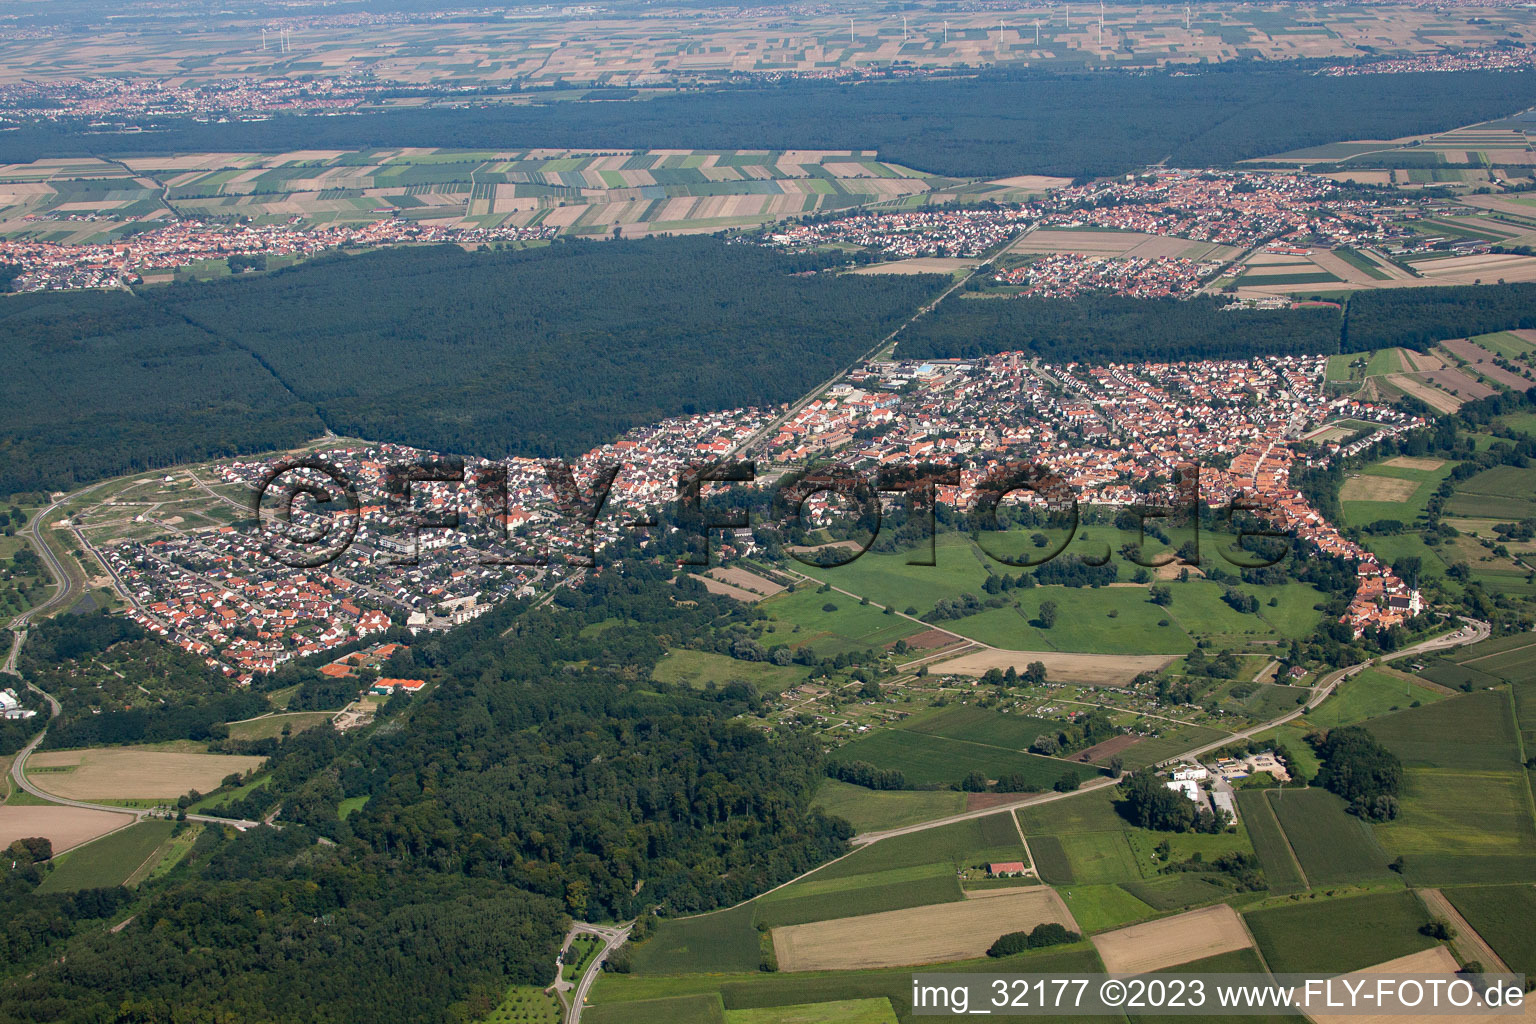 Jockgrim in the state Rhineland-Palatinate, Germany seen from above